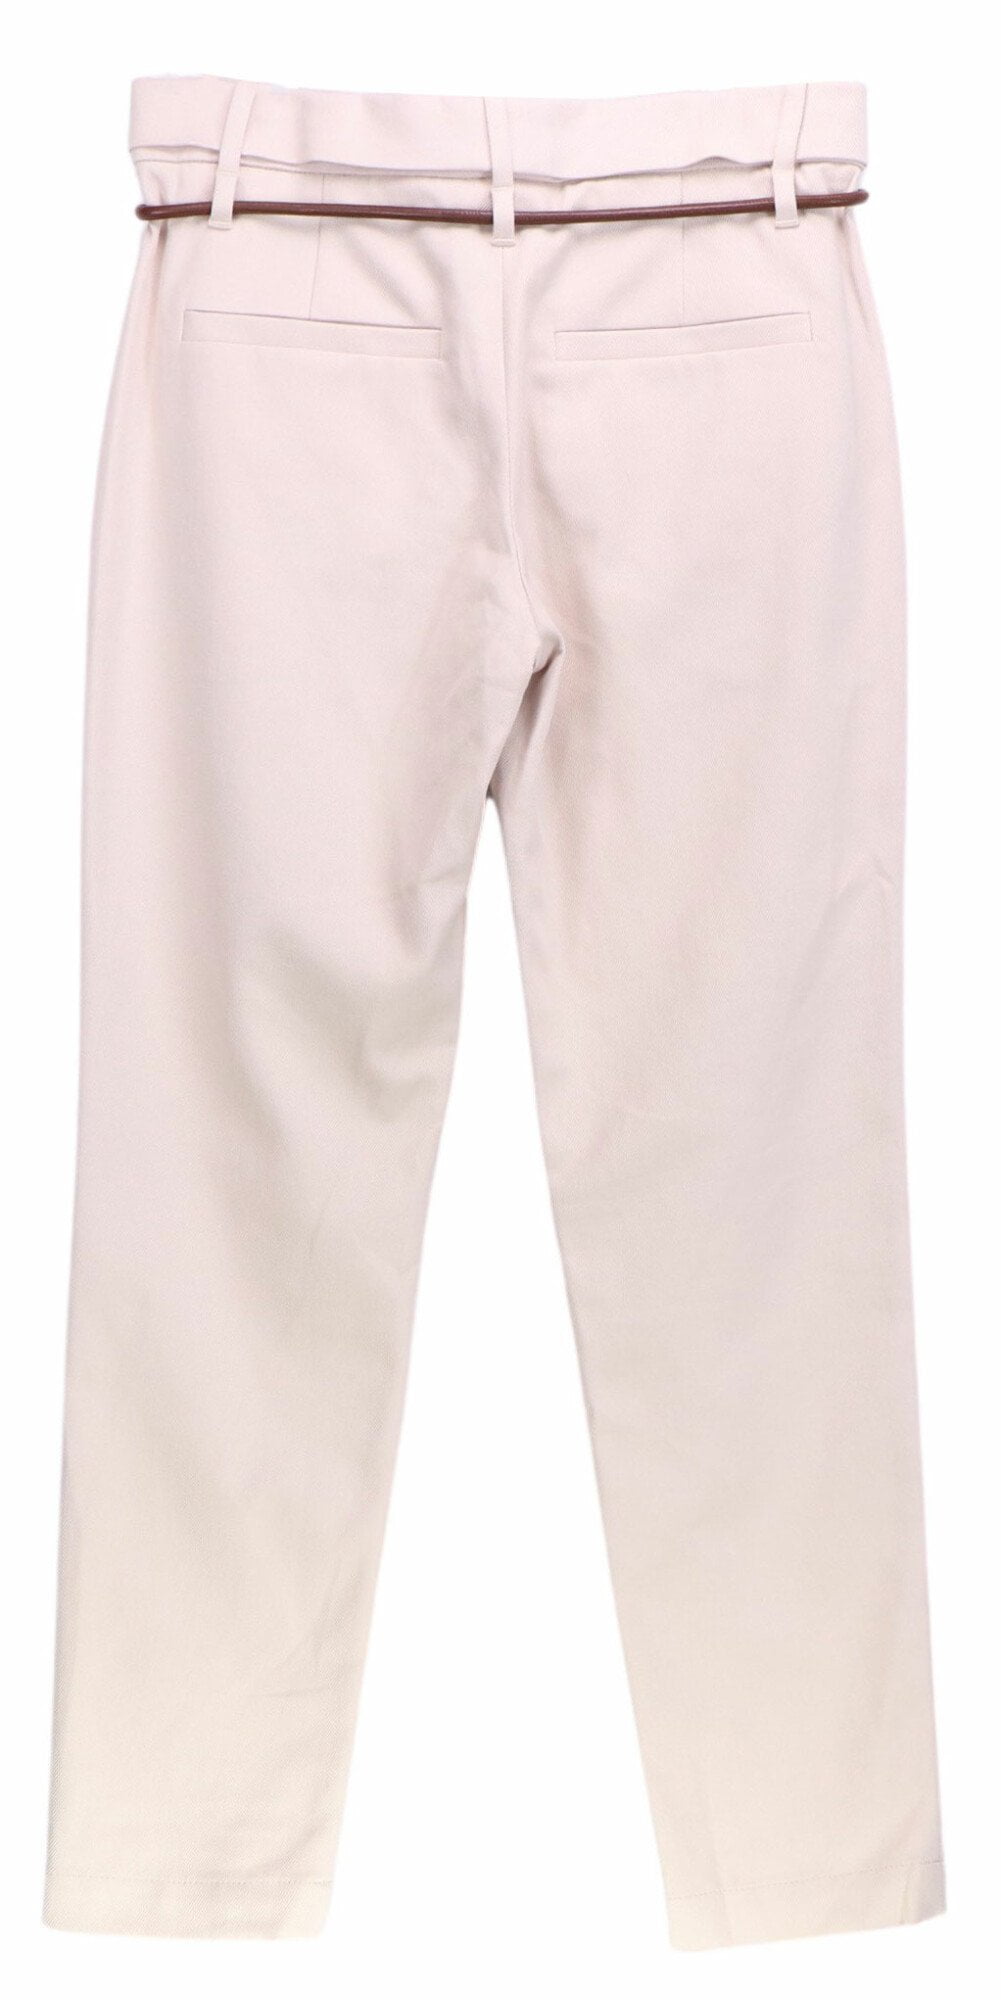 Womens Clothing Trousers Eleventy Synthetic Trouser in Beige Natural Slacks and Chinos Skinny trousers 